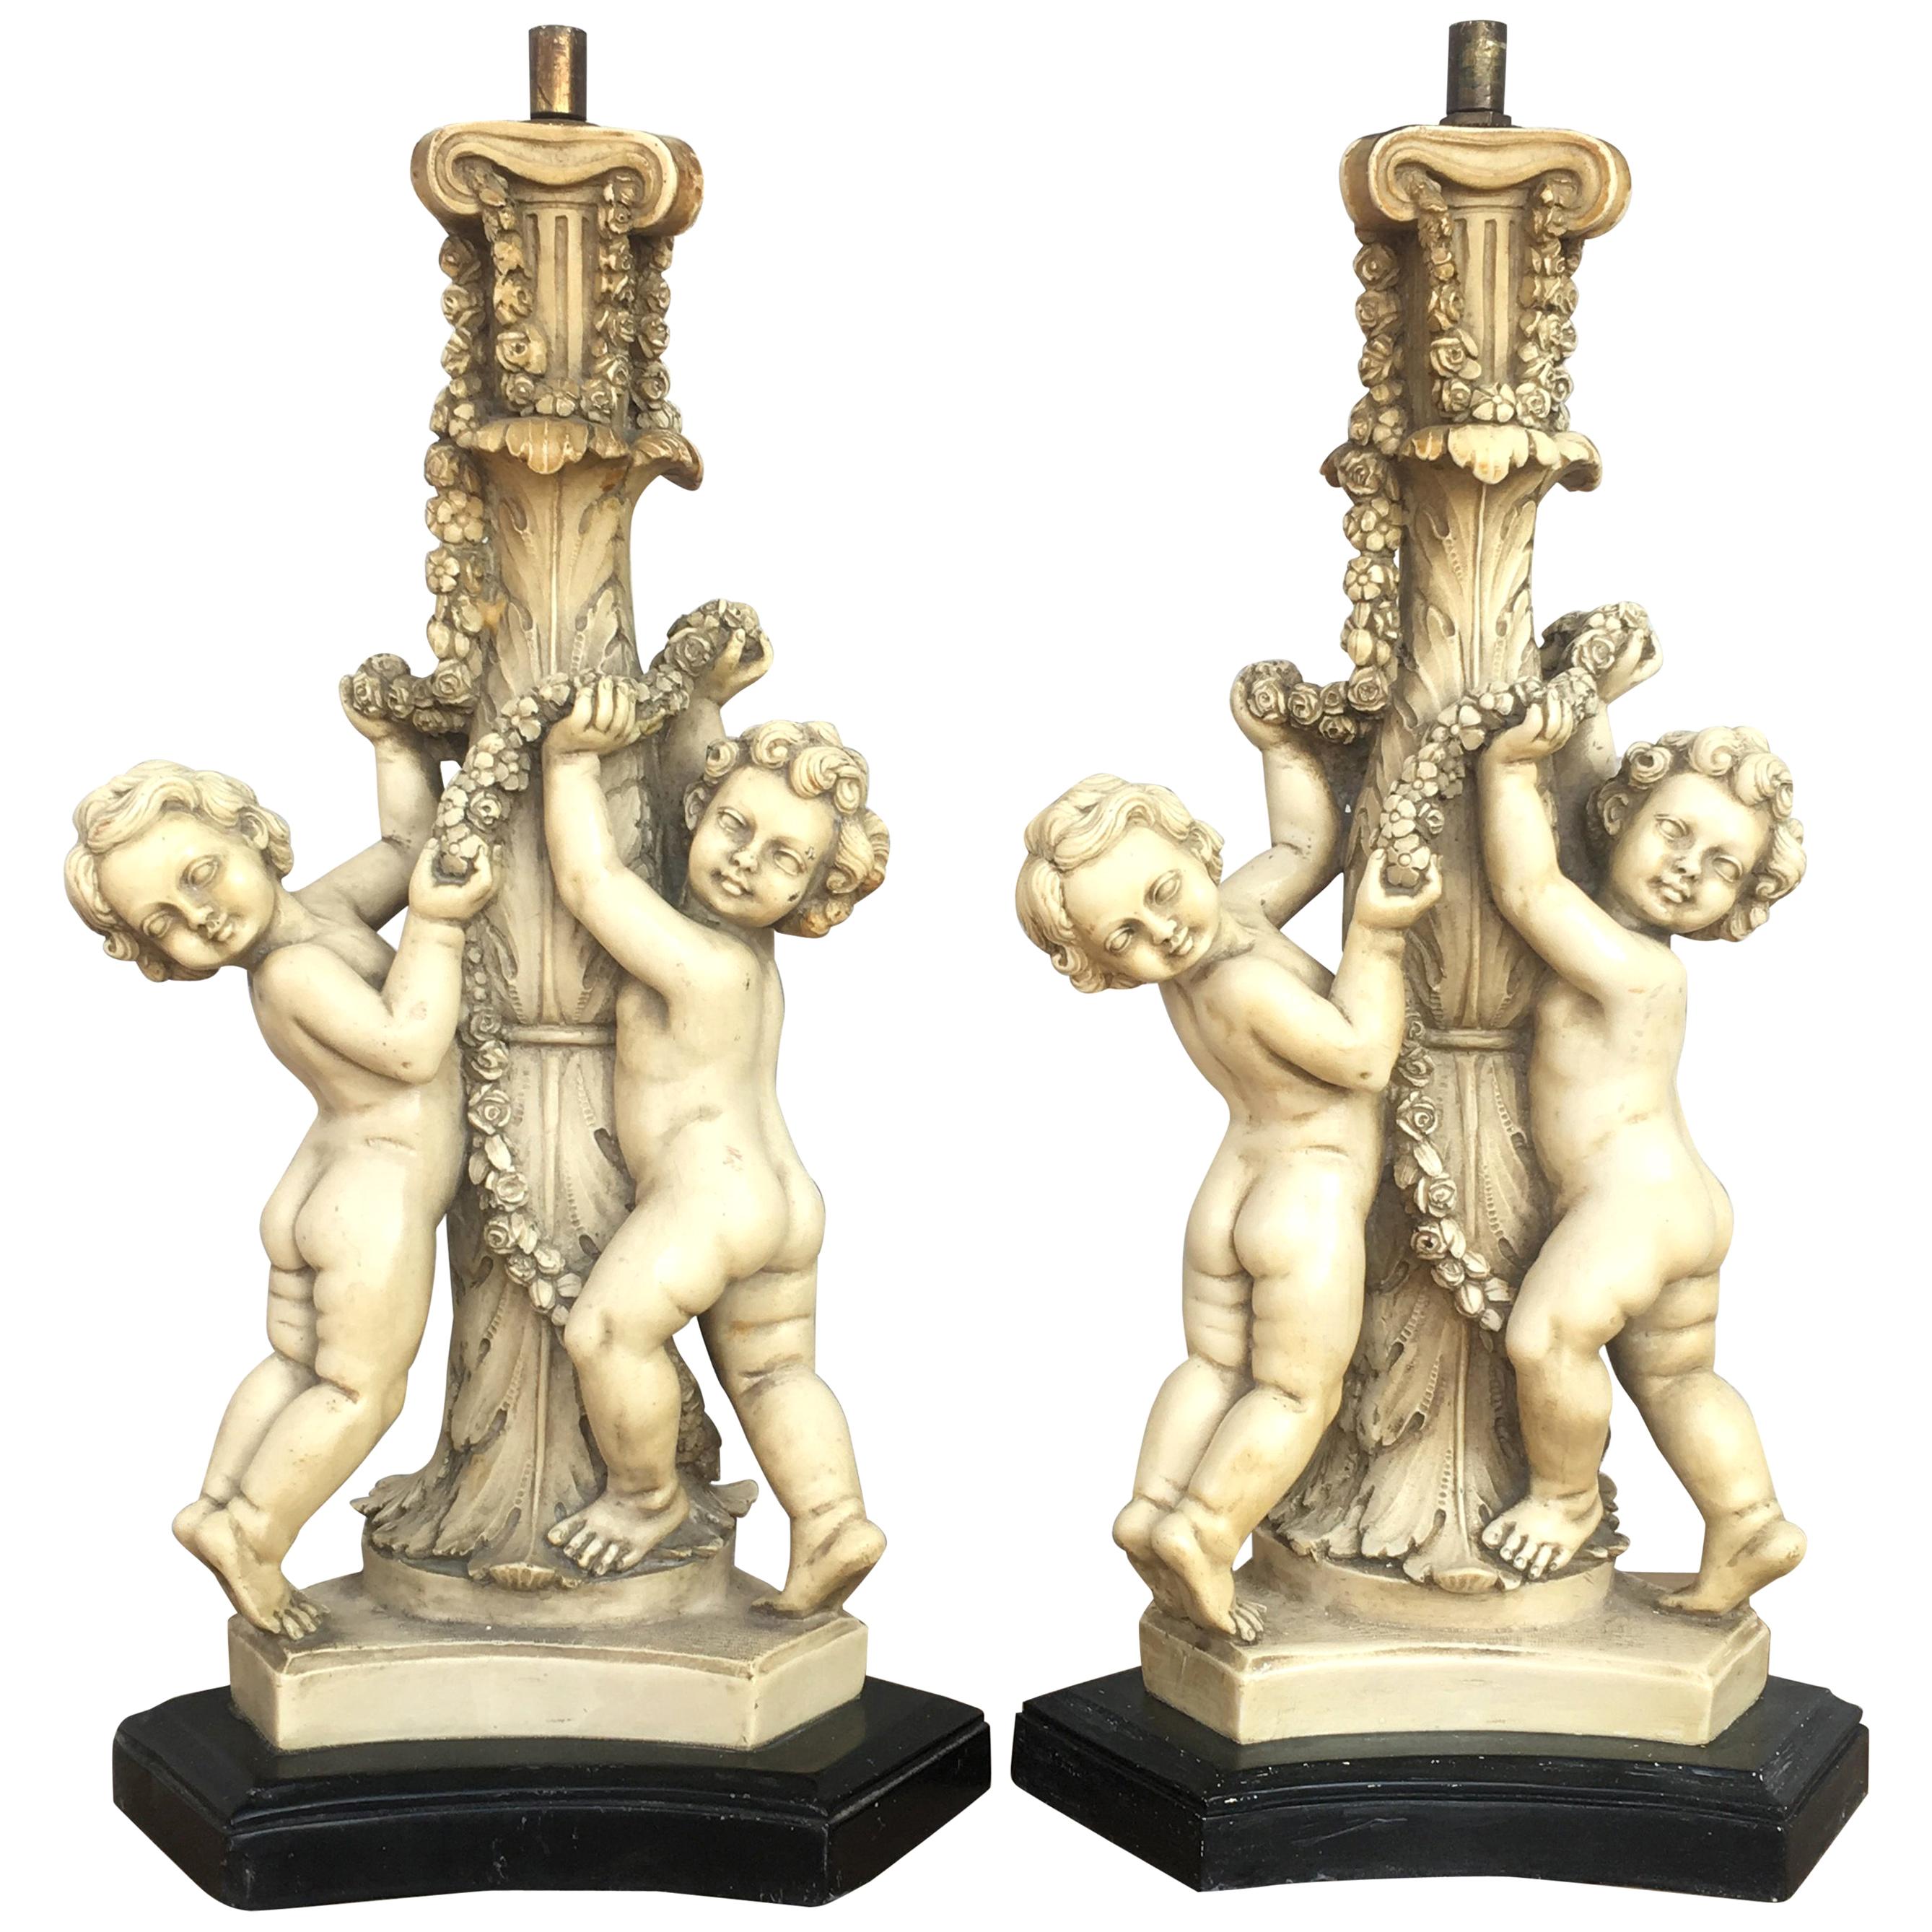 20th Century Pair of White Resin Cherub Lamps on Wooden Bases by G. Ruggeri